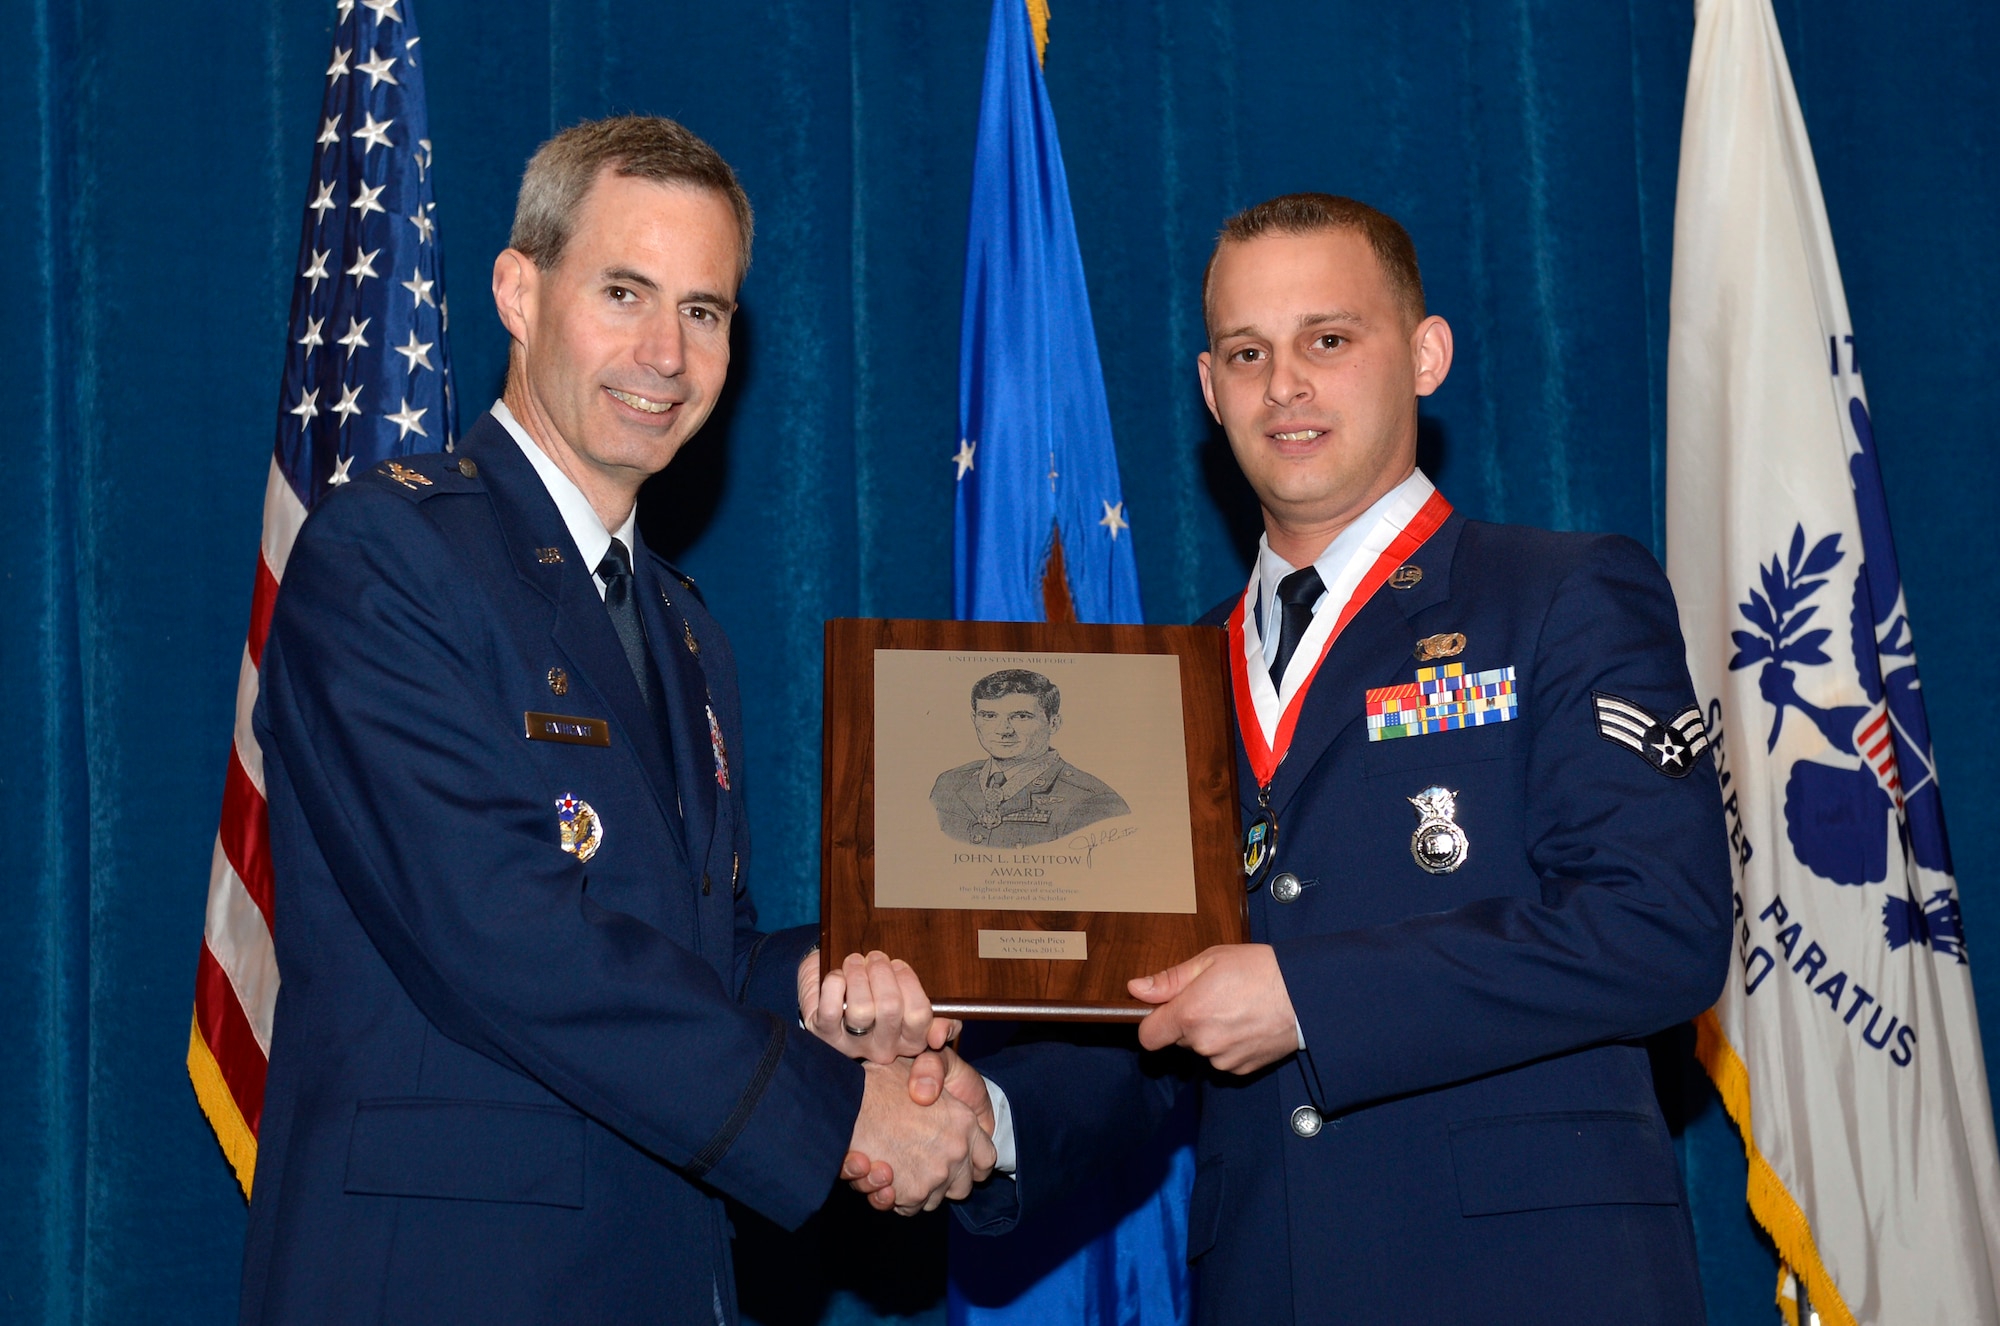 McGHEE TYSON AIR NATIONAL GUARD BASE, Tenn. – Col. Timothy J. Cathcart, commander of the I.G. Brown Training and Education Center here awards Senior Airman Joseph Pico assigned to the 106th Rescue Wing, New York Air National Guard, the John L. Levitow Award, the highest award bestowed for Air Force enlisted professional military education.  Pico and 56 other students graduated from Airman Leadership School April 4 along with 266 Air Force Noncommissioned Officer Academy graduates at the Paul H. Lankford EPME Center.  (National Guard photo by Master Sgt. Kurt Skoglund)